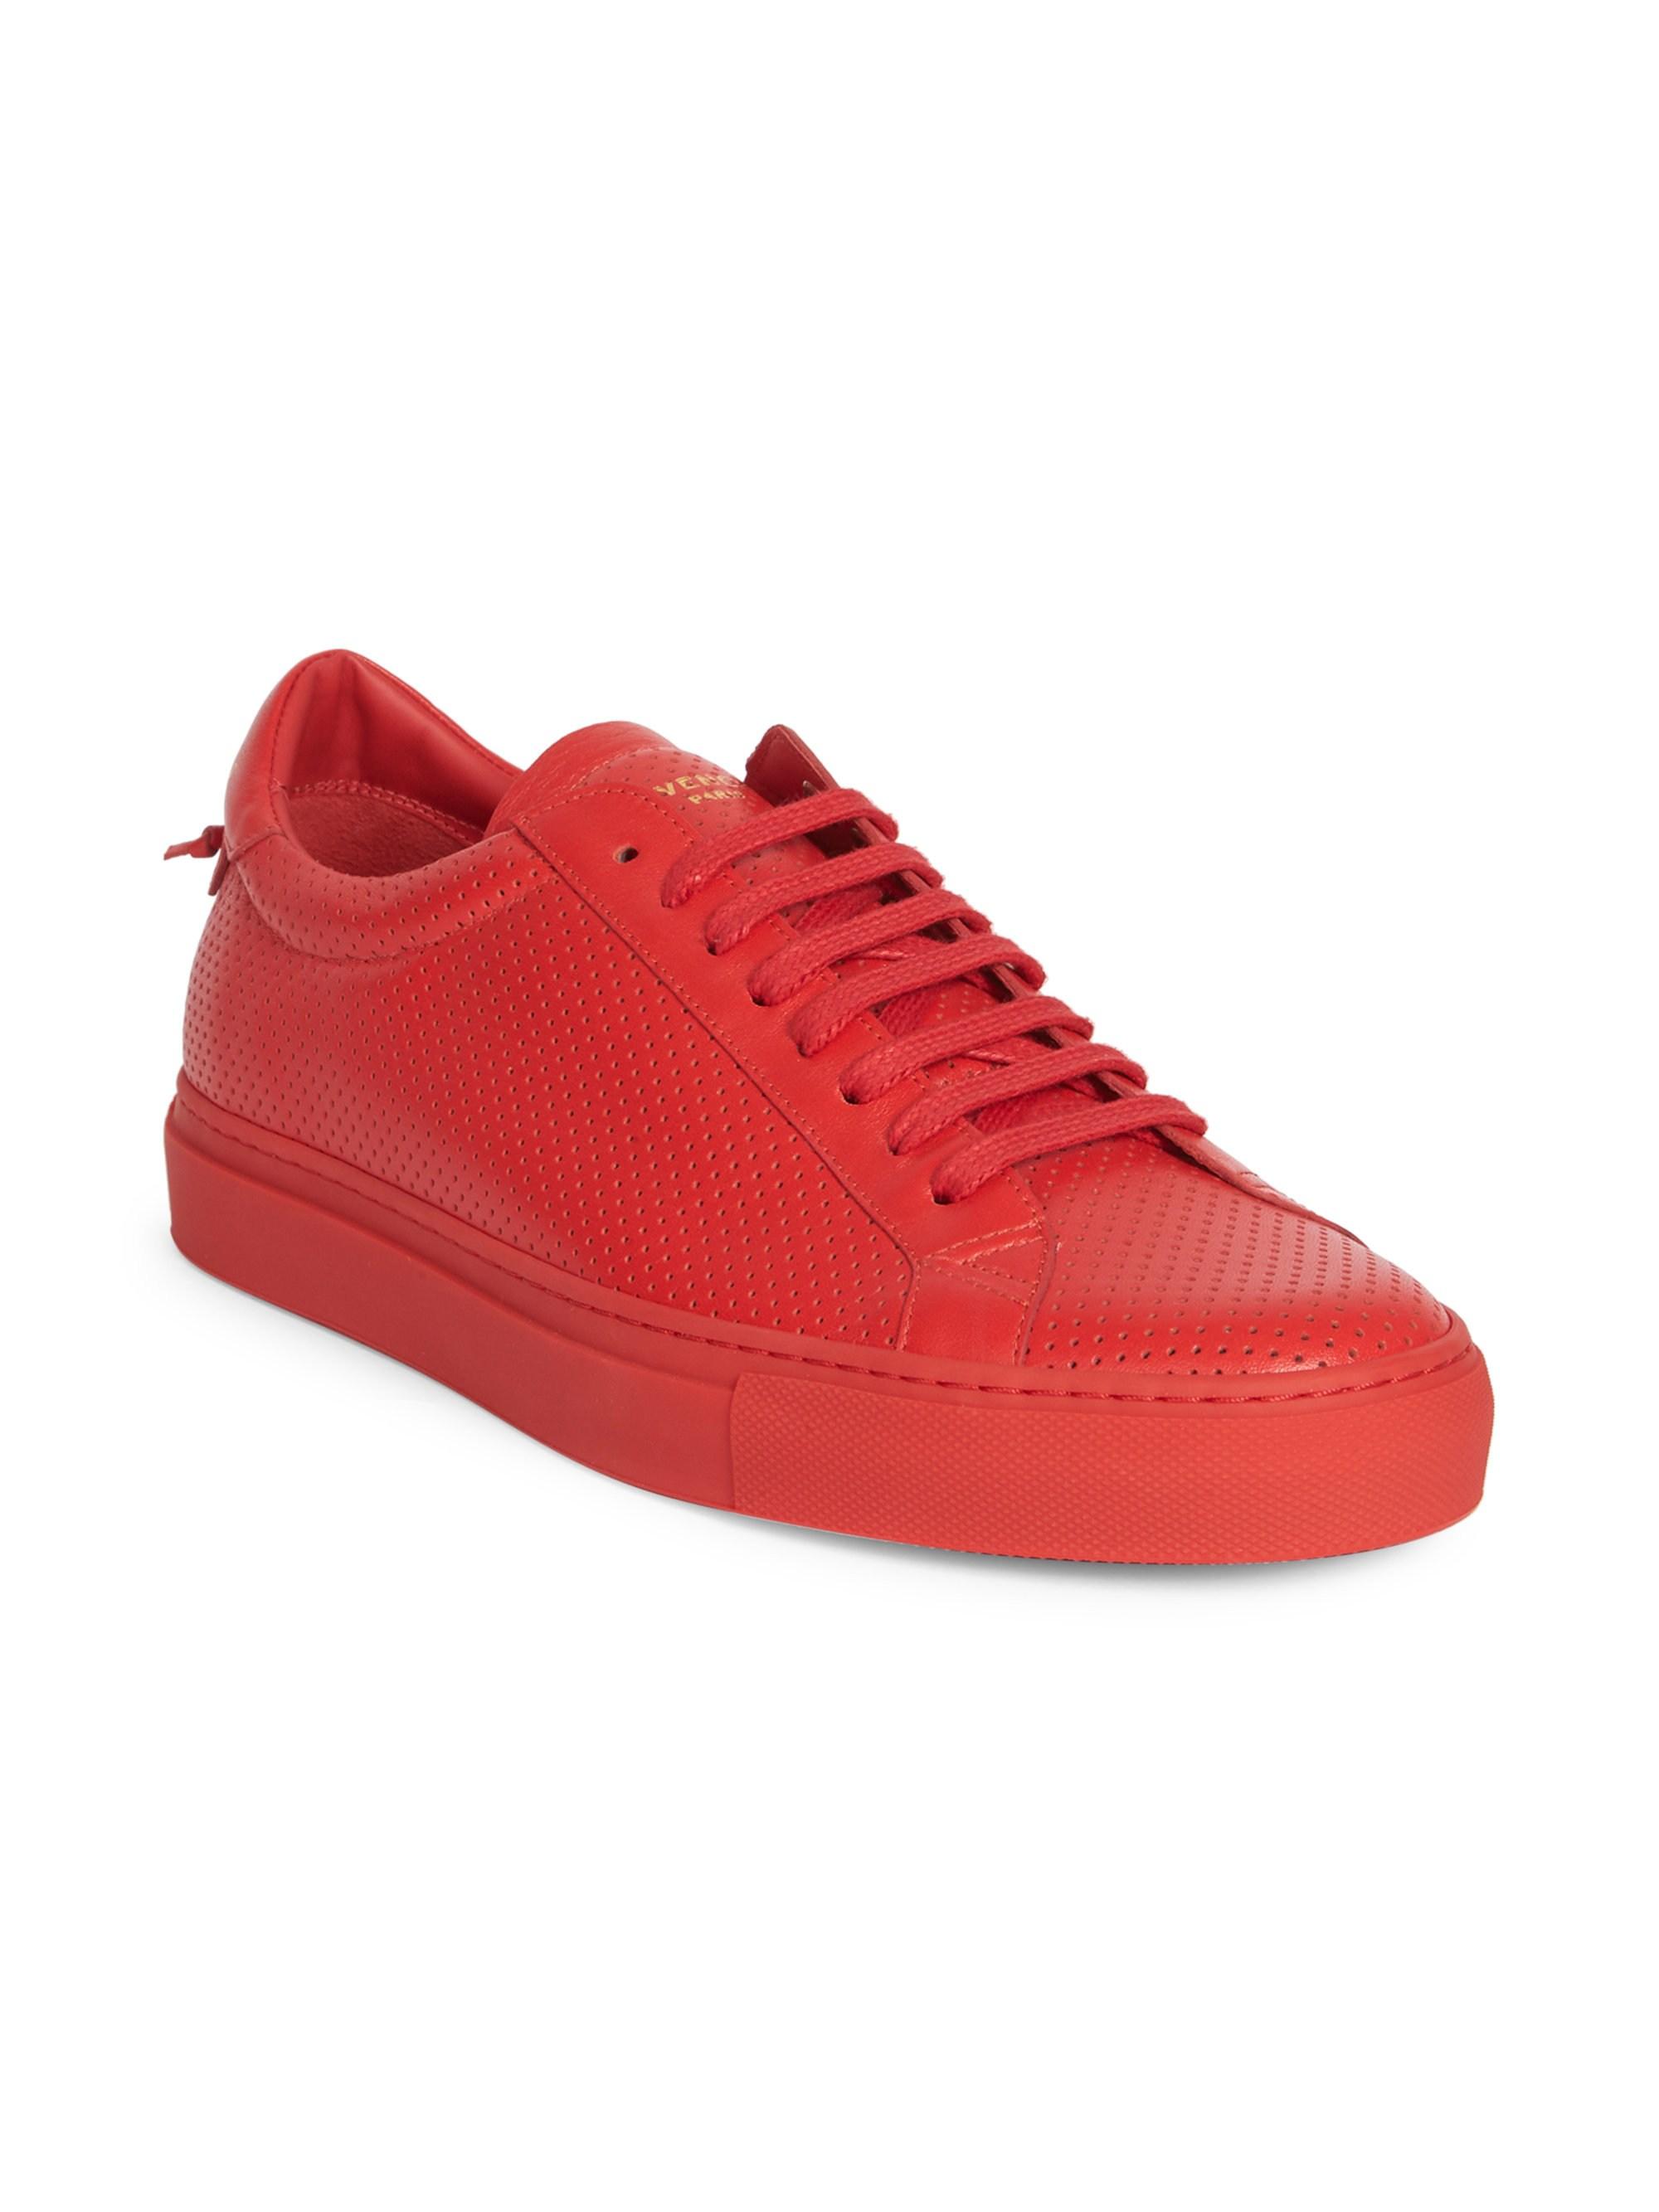 Givenchy Urban Street Perforated Leather Sneakers in Red for Men - Lyst